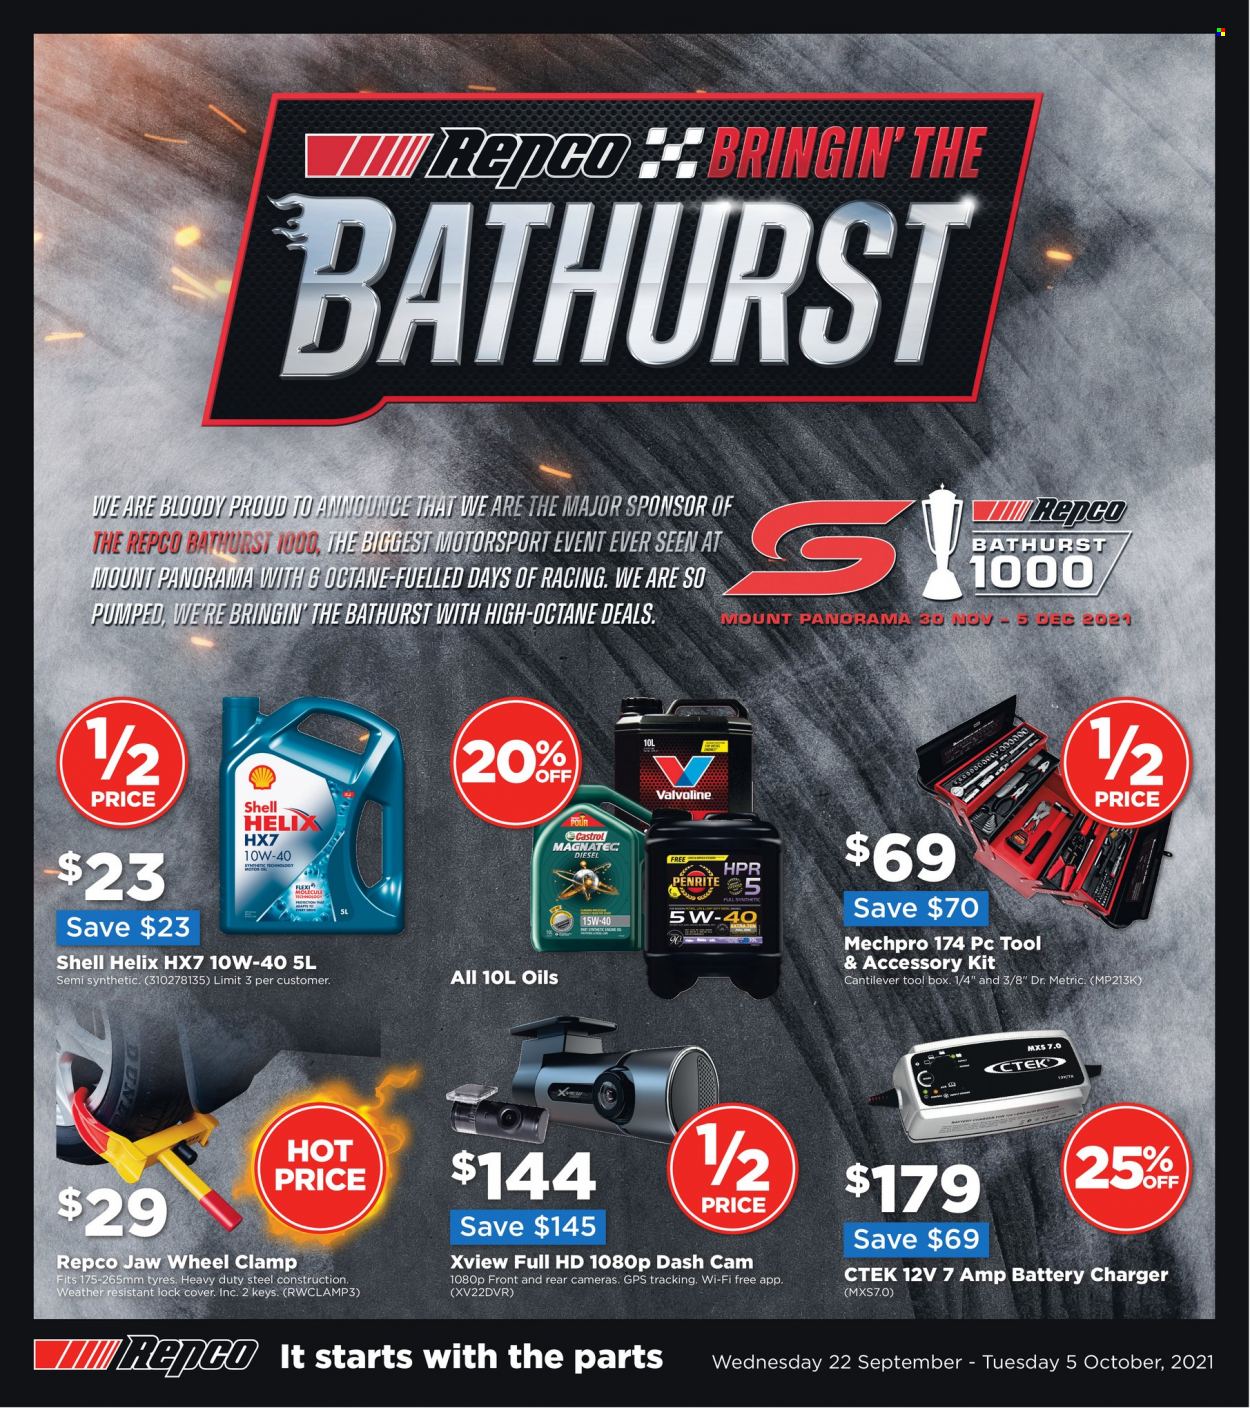 thumbnail - Repco Catalogue - 22 Sep 2021 - 5 Oct 2021 - Sales products - dashboard camera, tool box, battery charger, Penrite, Shell, Valvoline, Castrol, tires. Page 1.